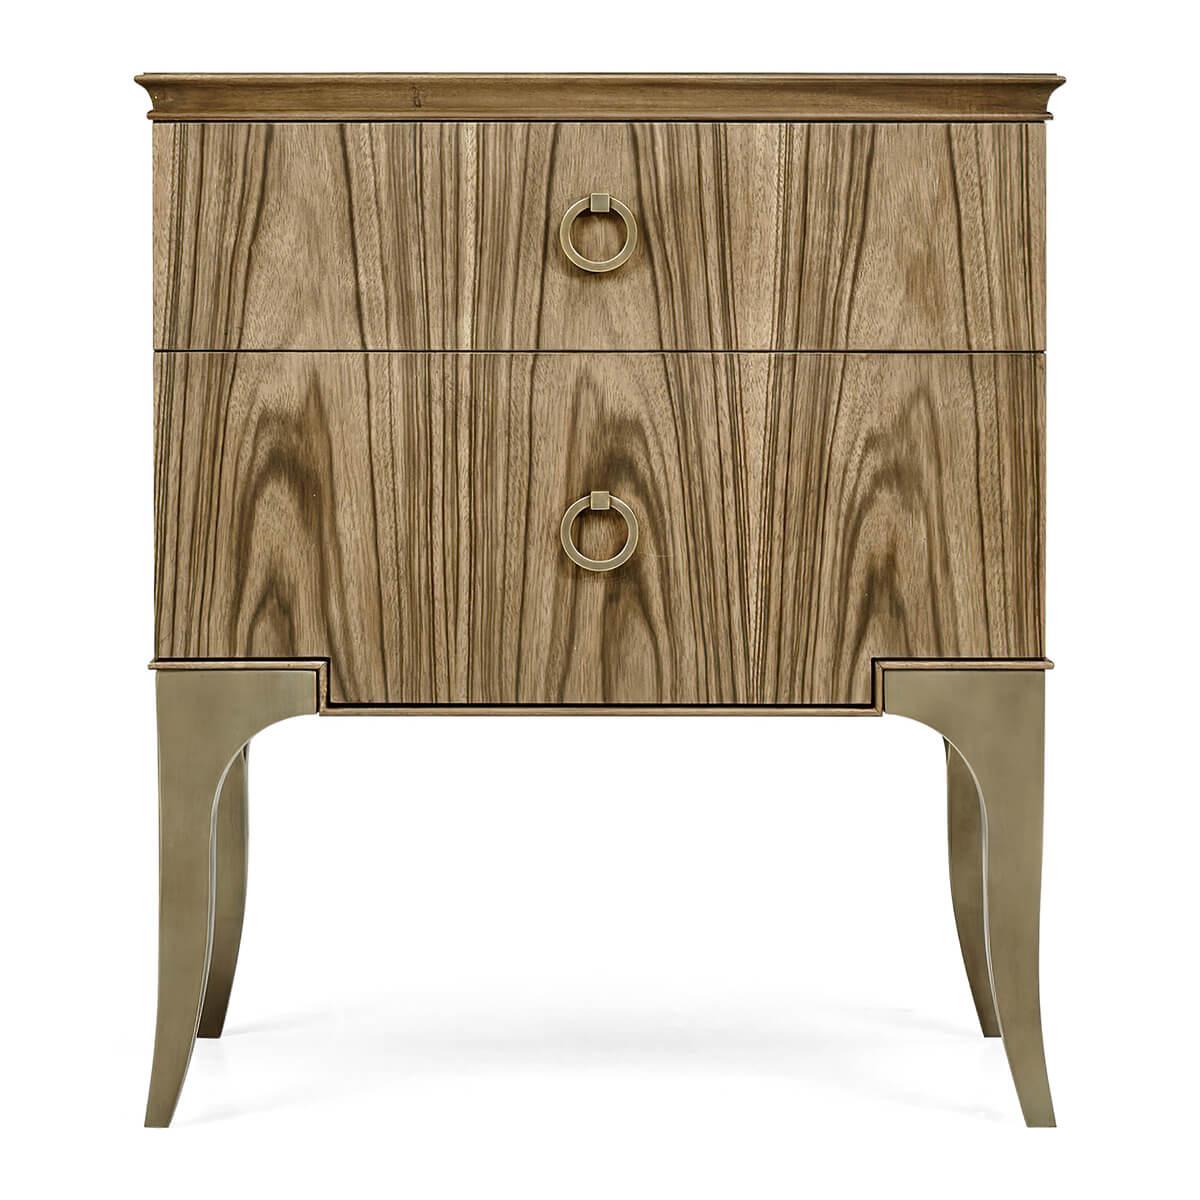 A pair of Modern Paldoa two-drawer bedside tables. The case is constructed of hardwood with a light, transparent lacquer finish. The drawer fronts feature flat cut paldao veneer, the brass pulls and cabriole legs are fabricated and acid dipped and